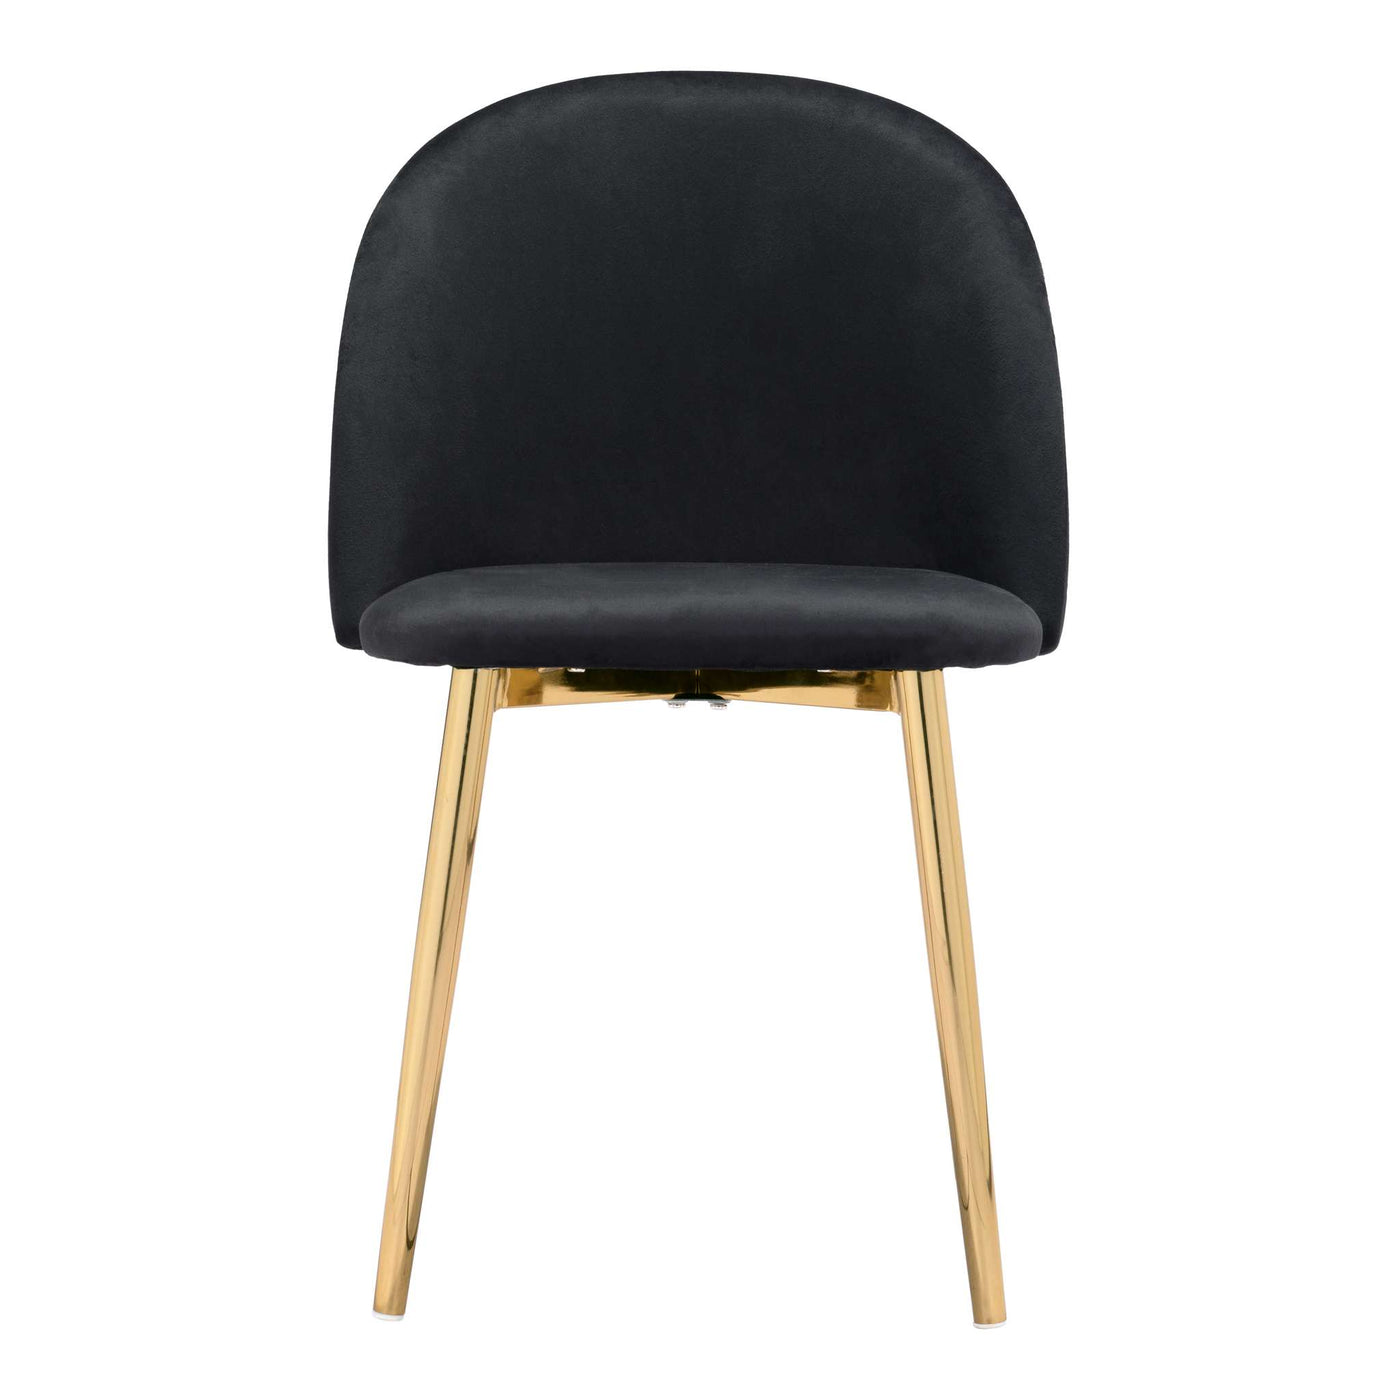 Zuo Mod Cozy Dining Chair